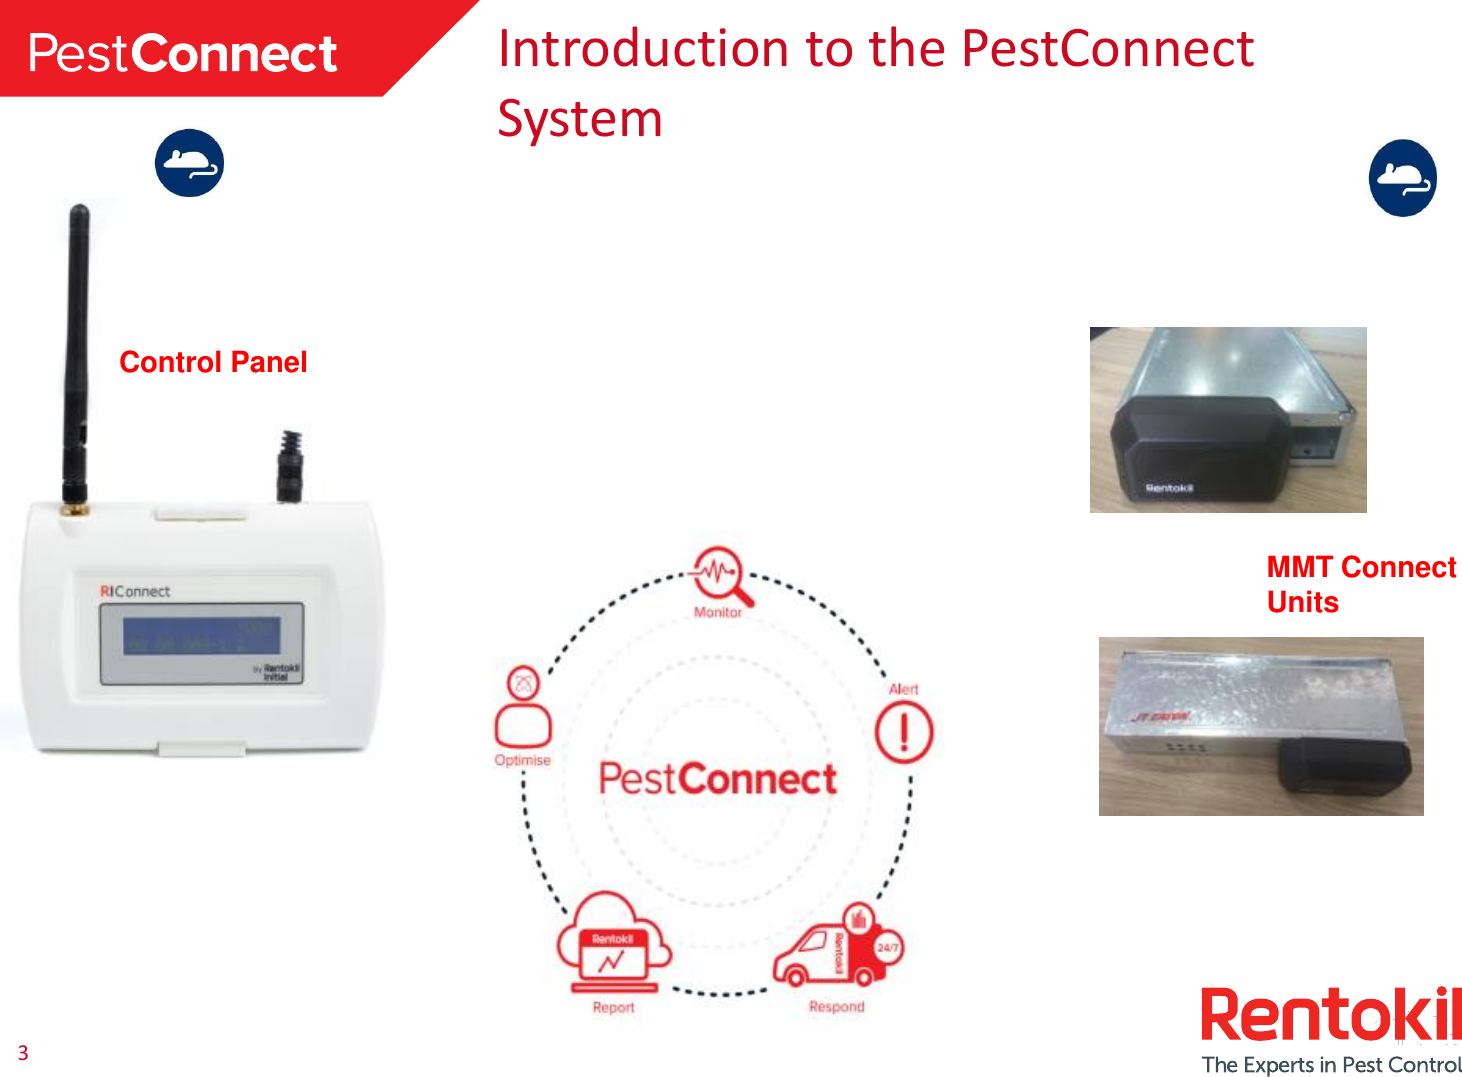 3Introduction to the PestConnect SystemMMT Connect UnitsControl Panel